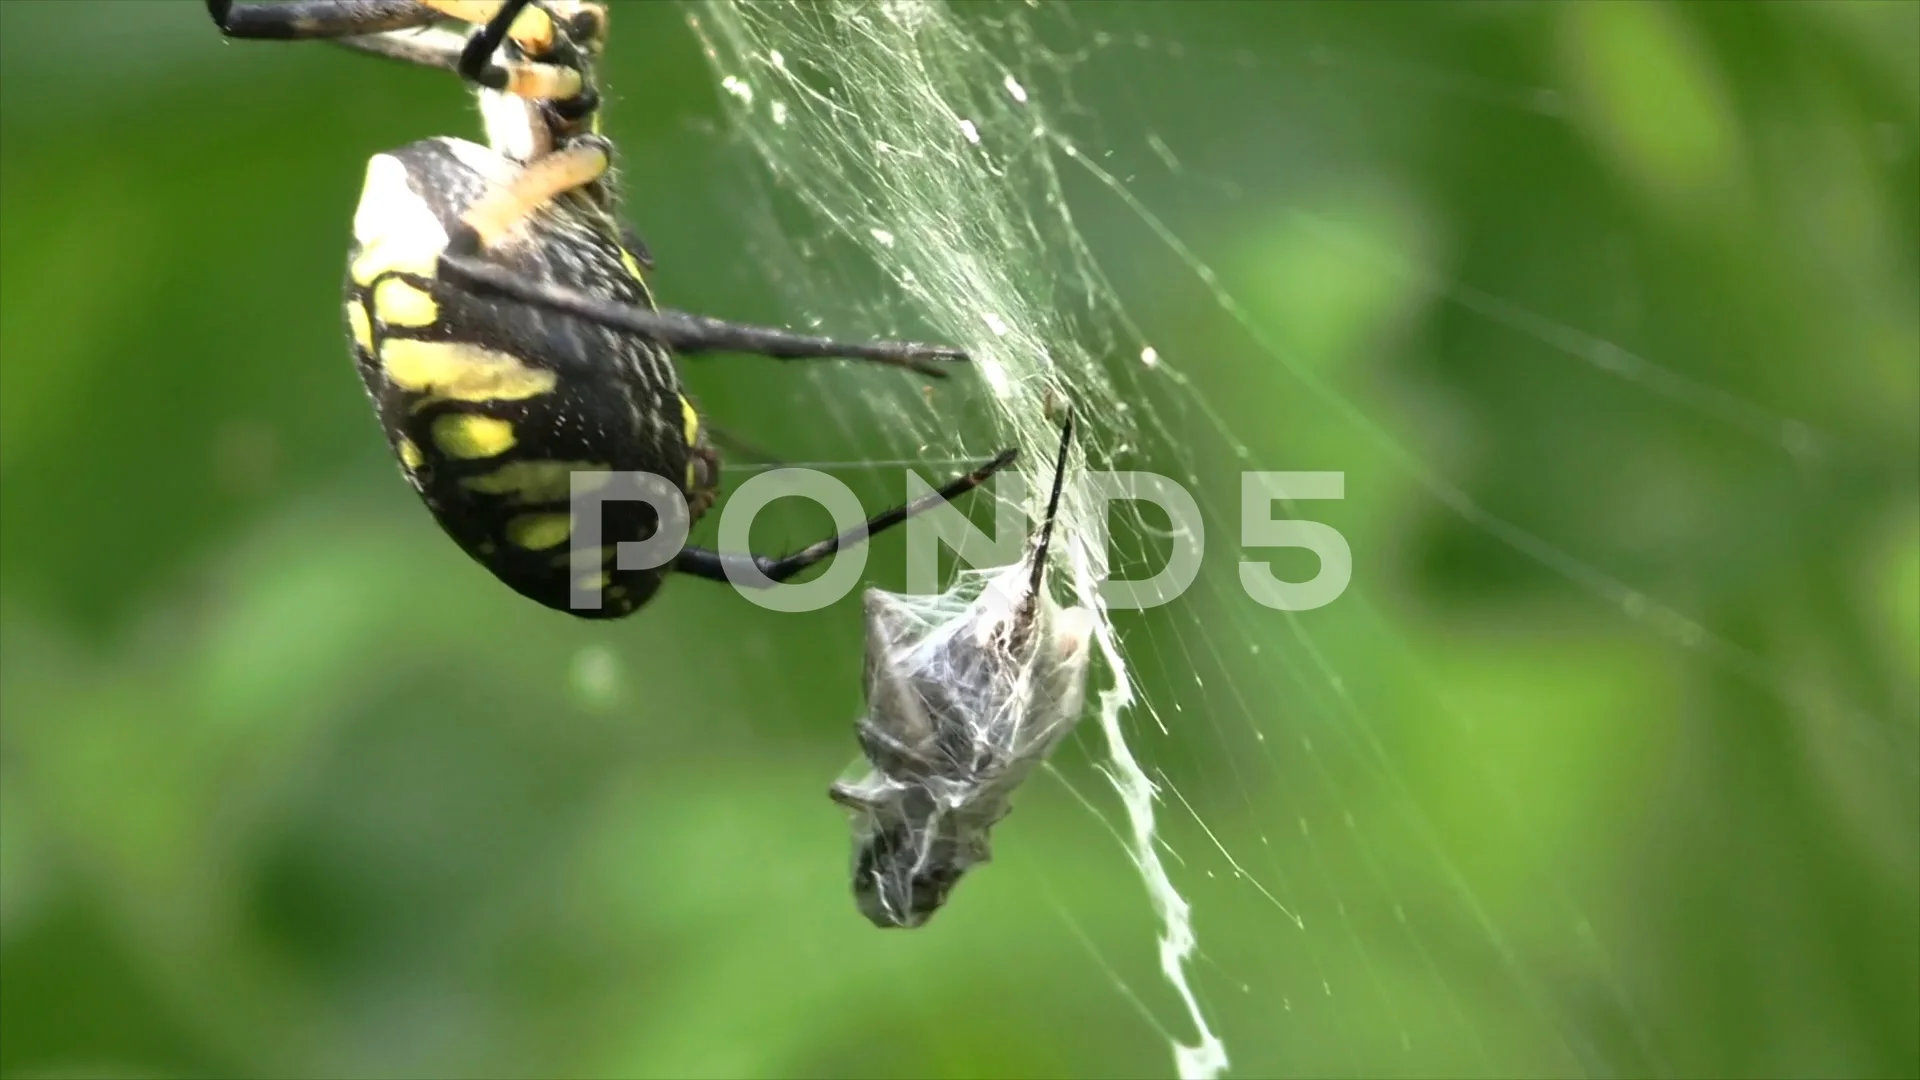 Spider wrapping a cricket in a web and t..